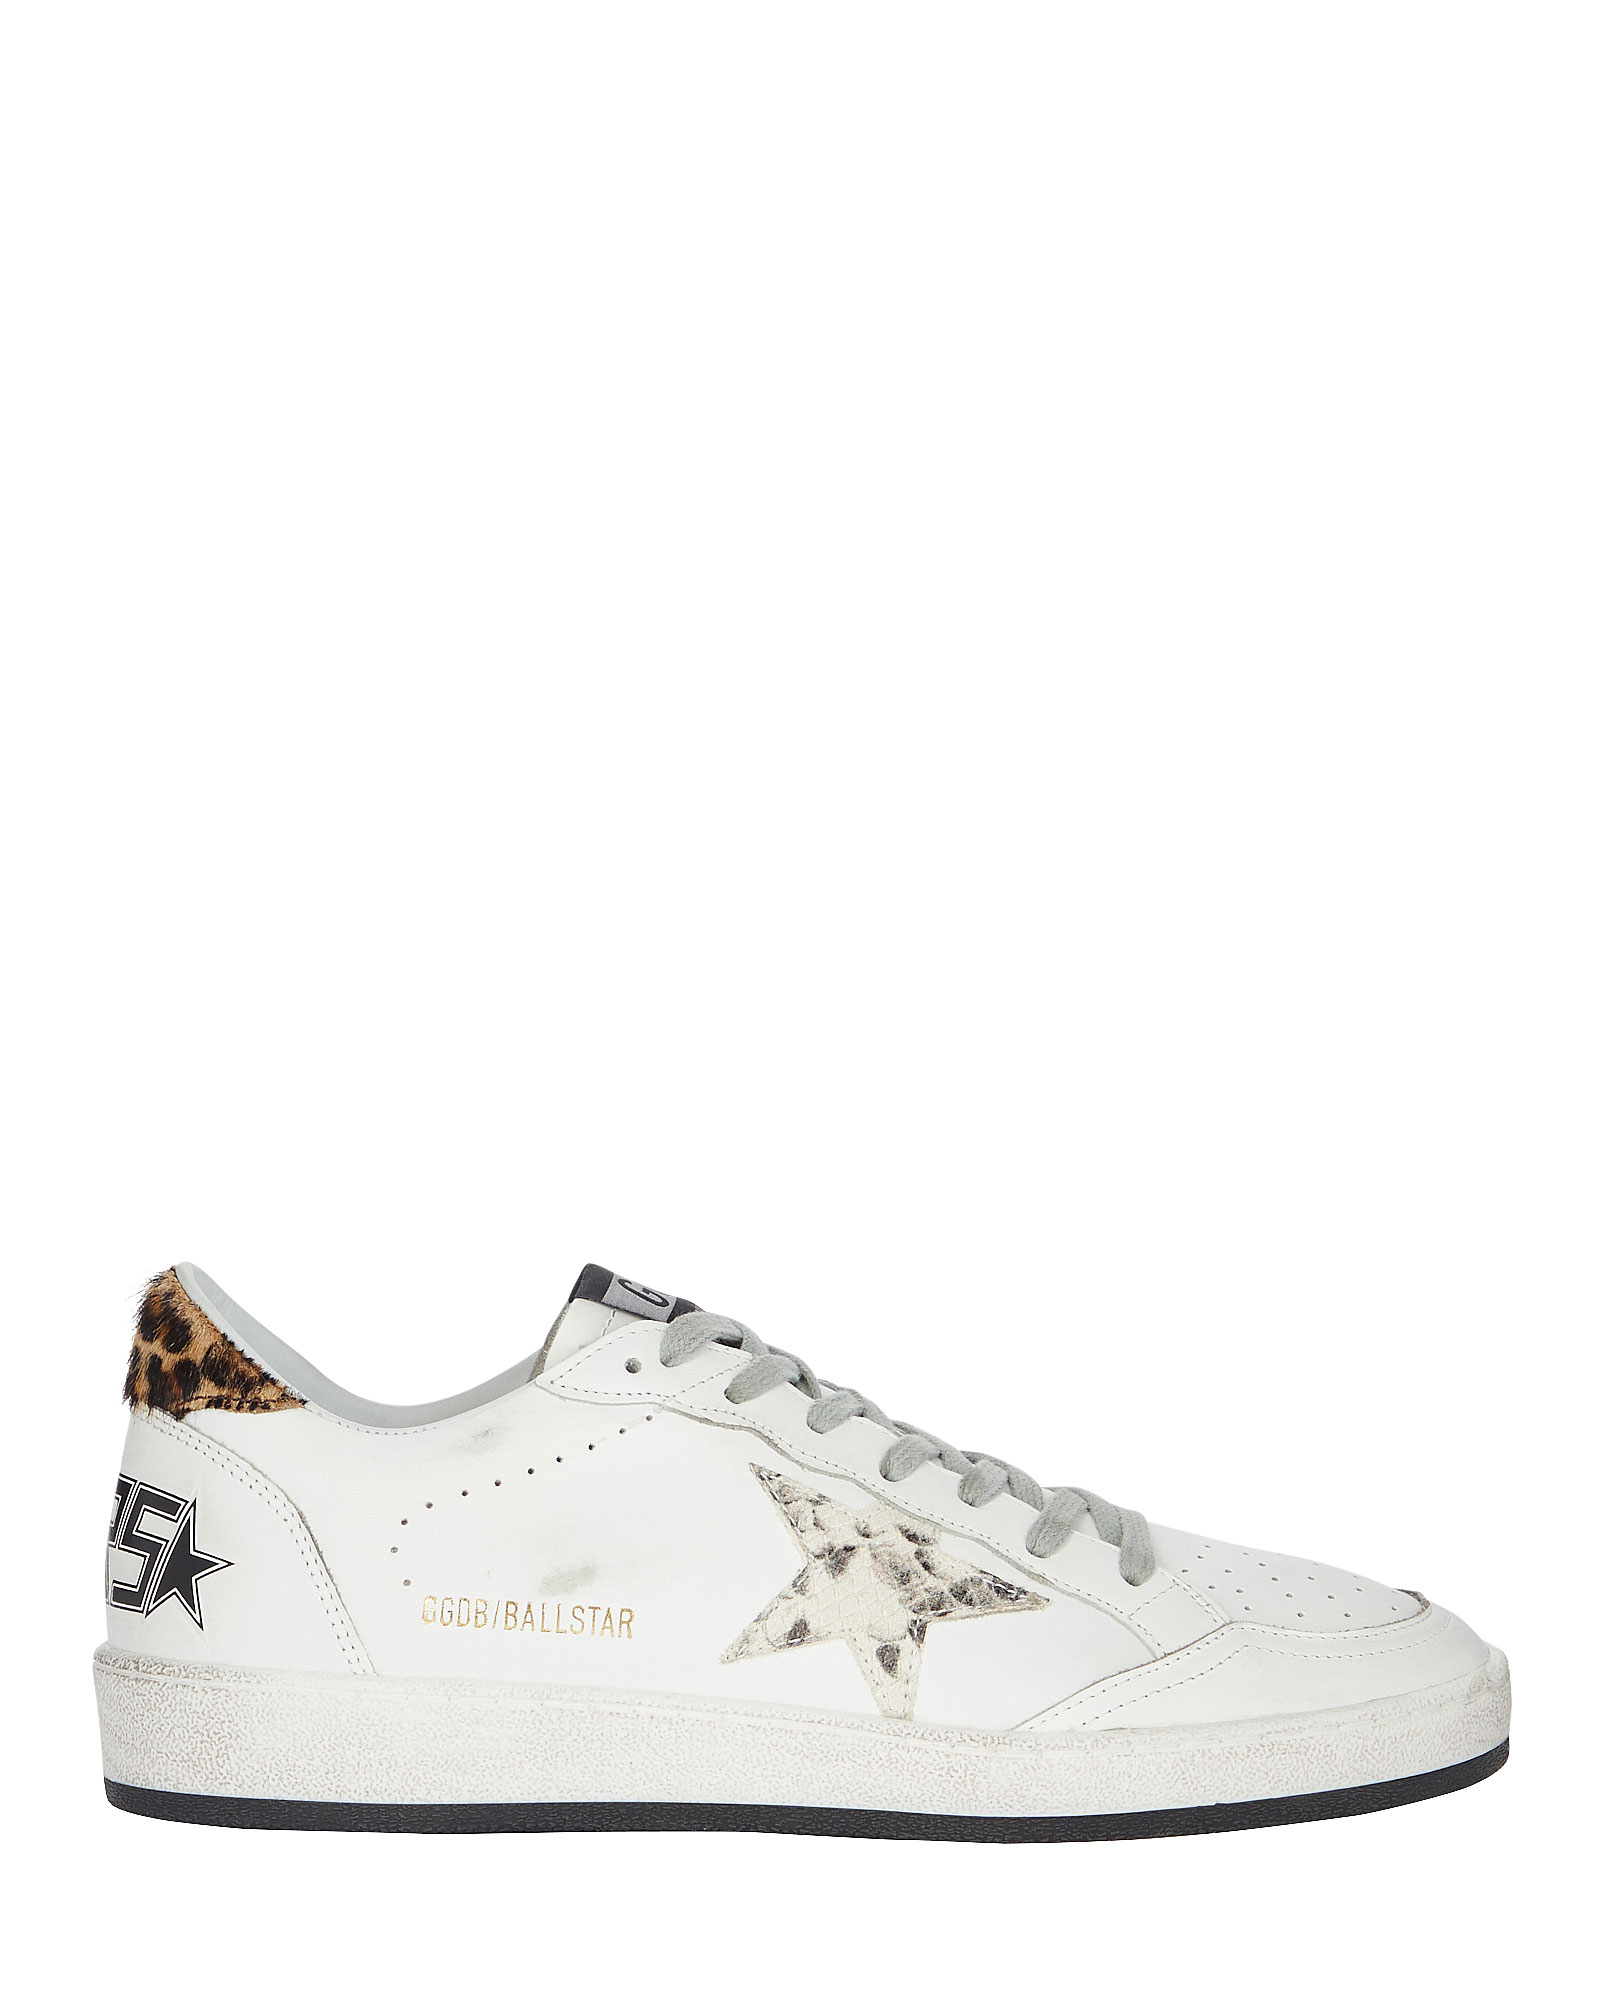 Golden Goose | Ball Star Leather Sneakers | INTERMIX®